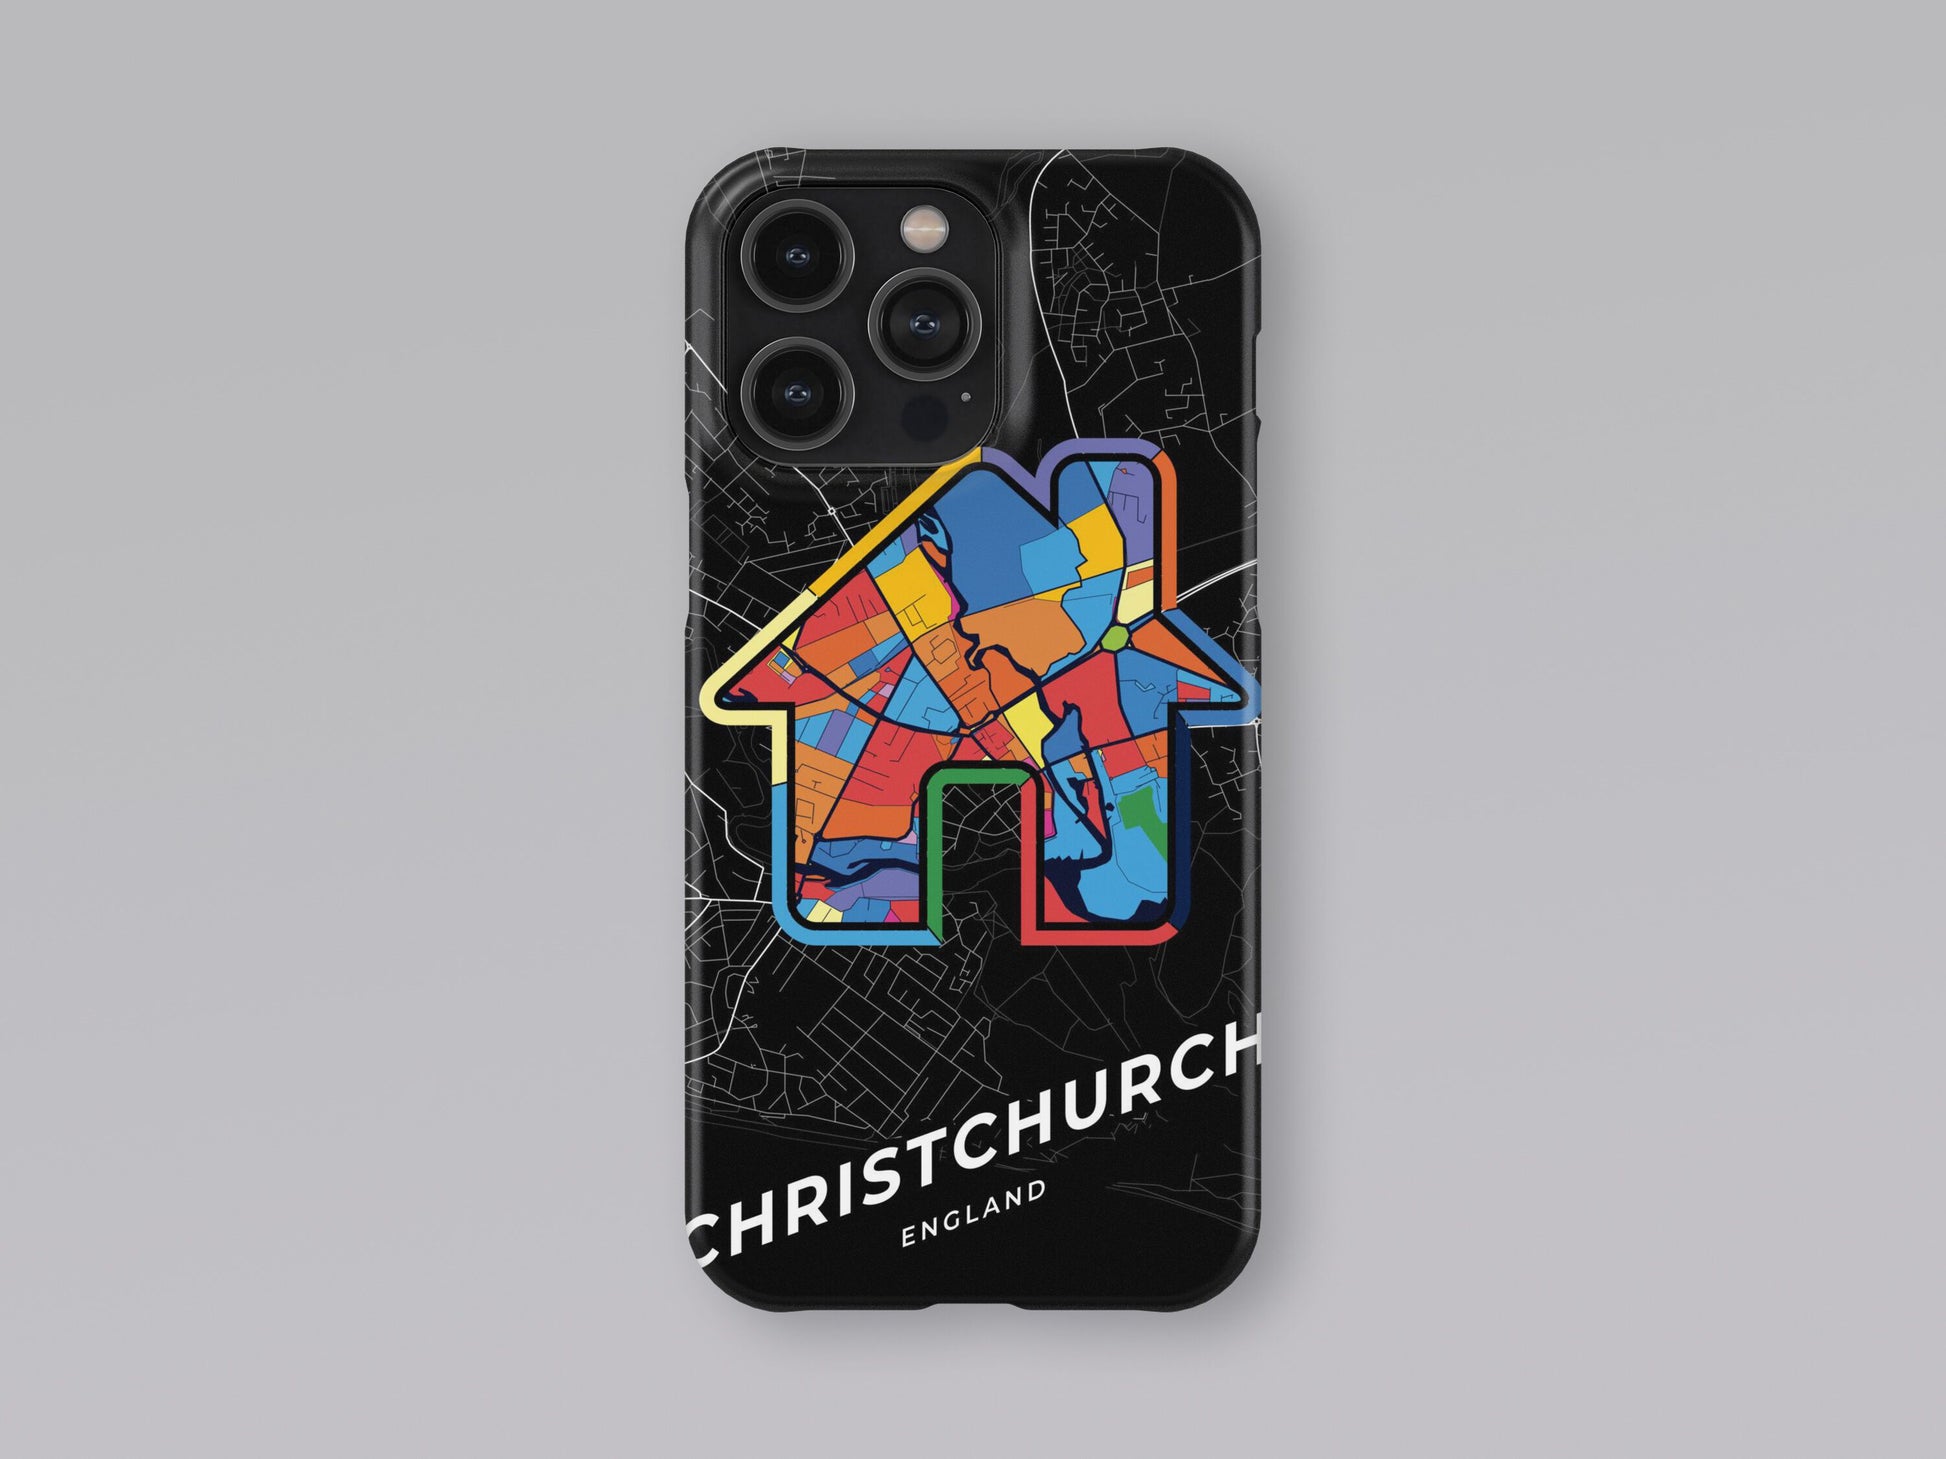 Christchurch England slim phone case with colorful icon. Birthday, wedding or housewarming gift. Couple match cases. 3